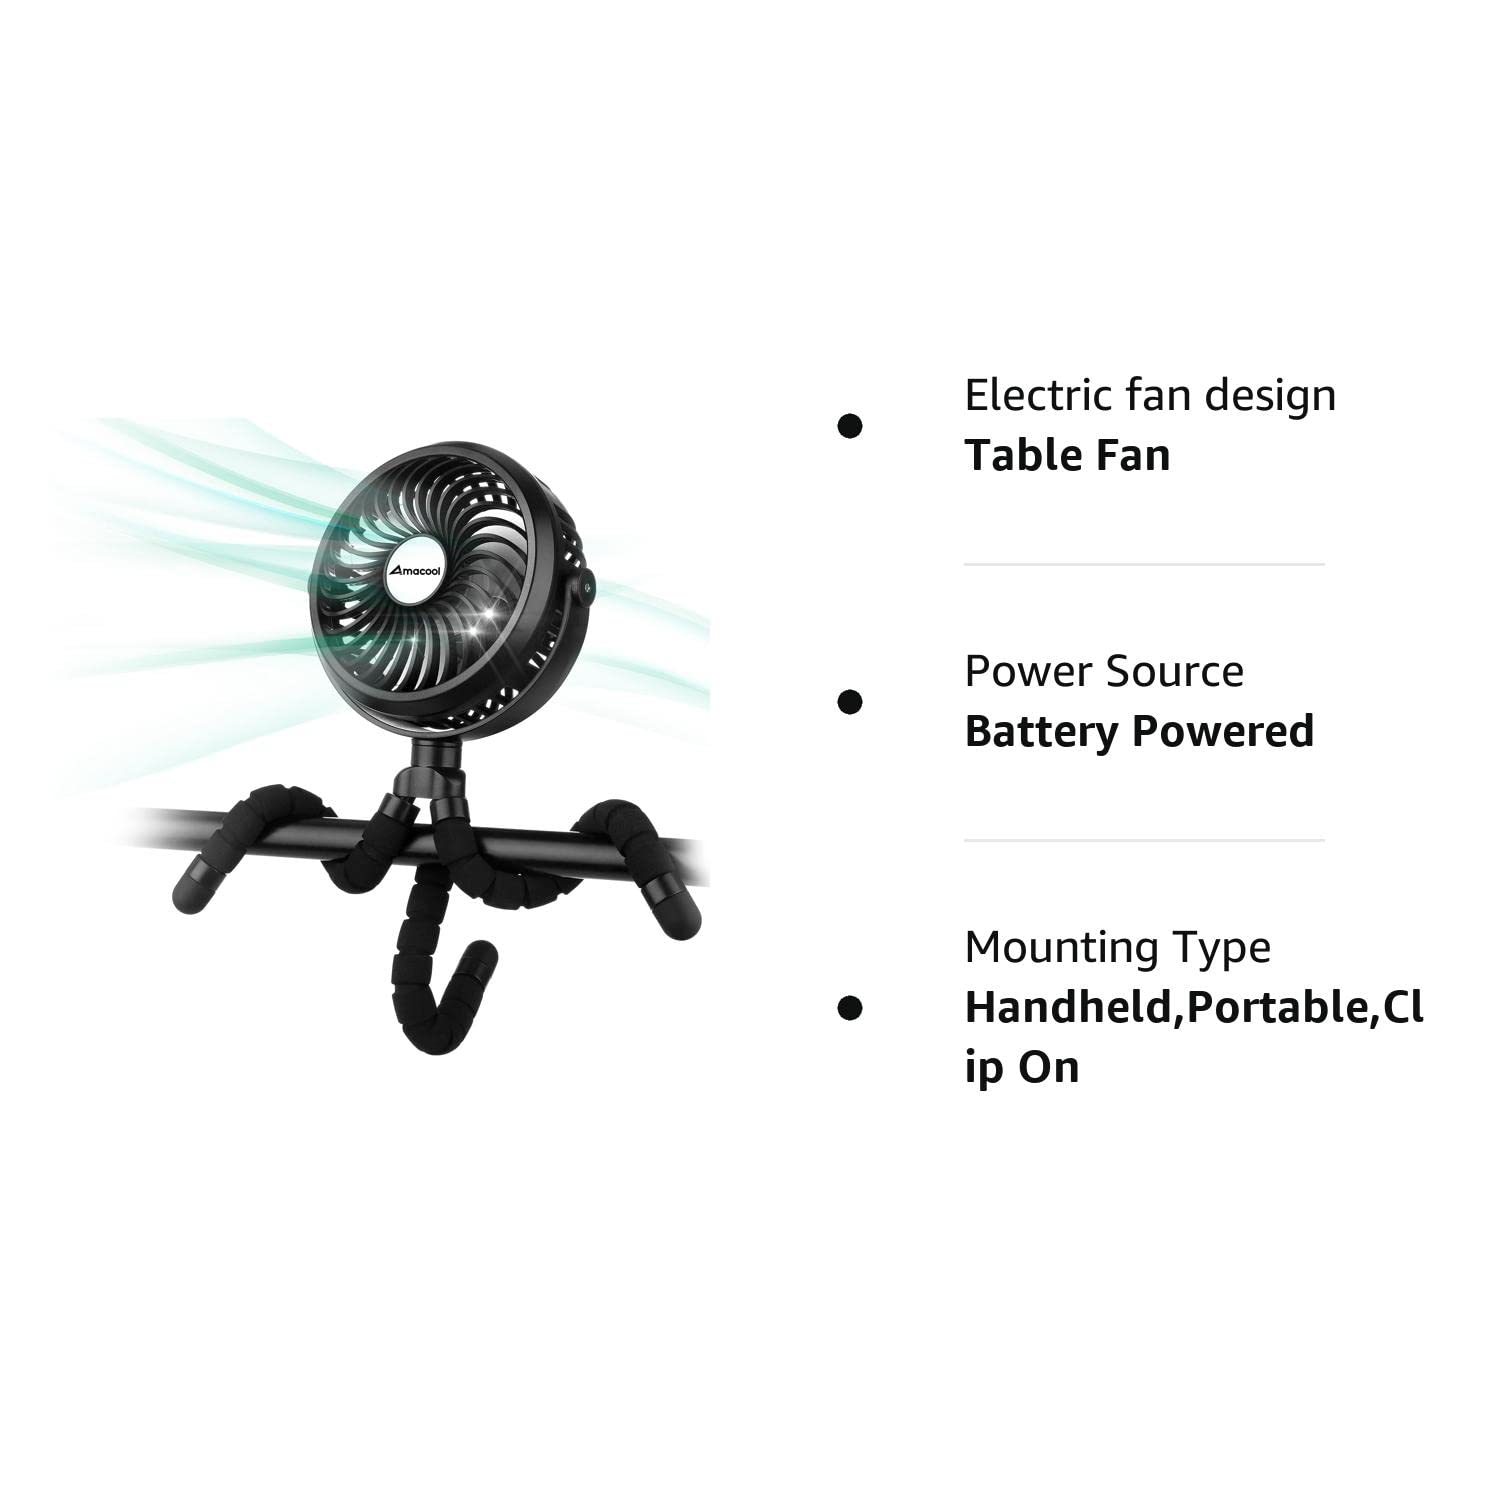 AMACOOL Battery Operated Stroller Fan Flexible Tripod Clip On Fan with 3 Speeds and Rotatable Handheld Personal Fan for Car Seat Crib Bike Treadmill (Black)